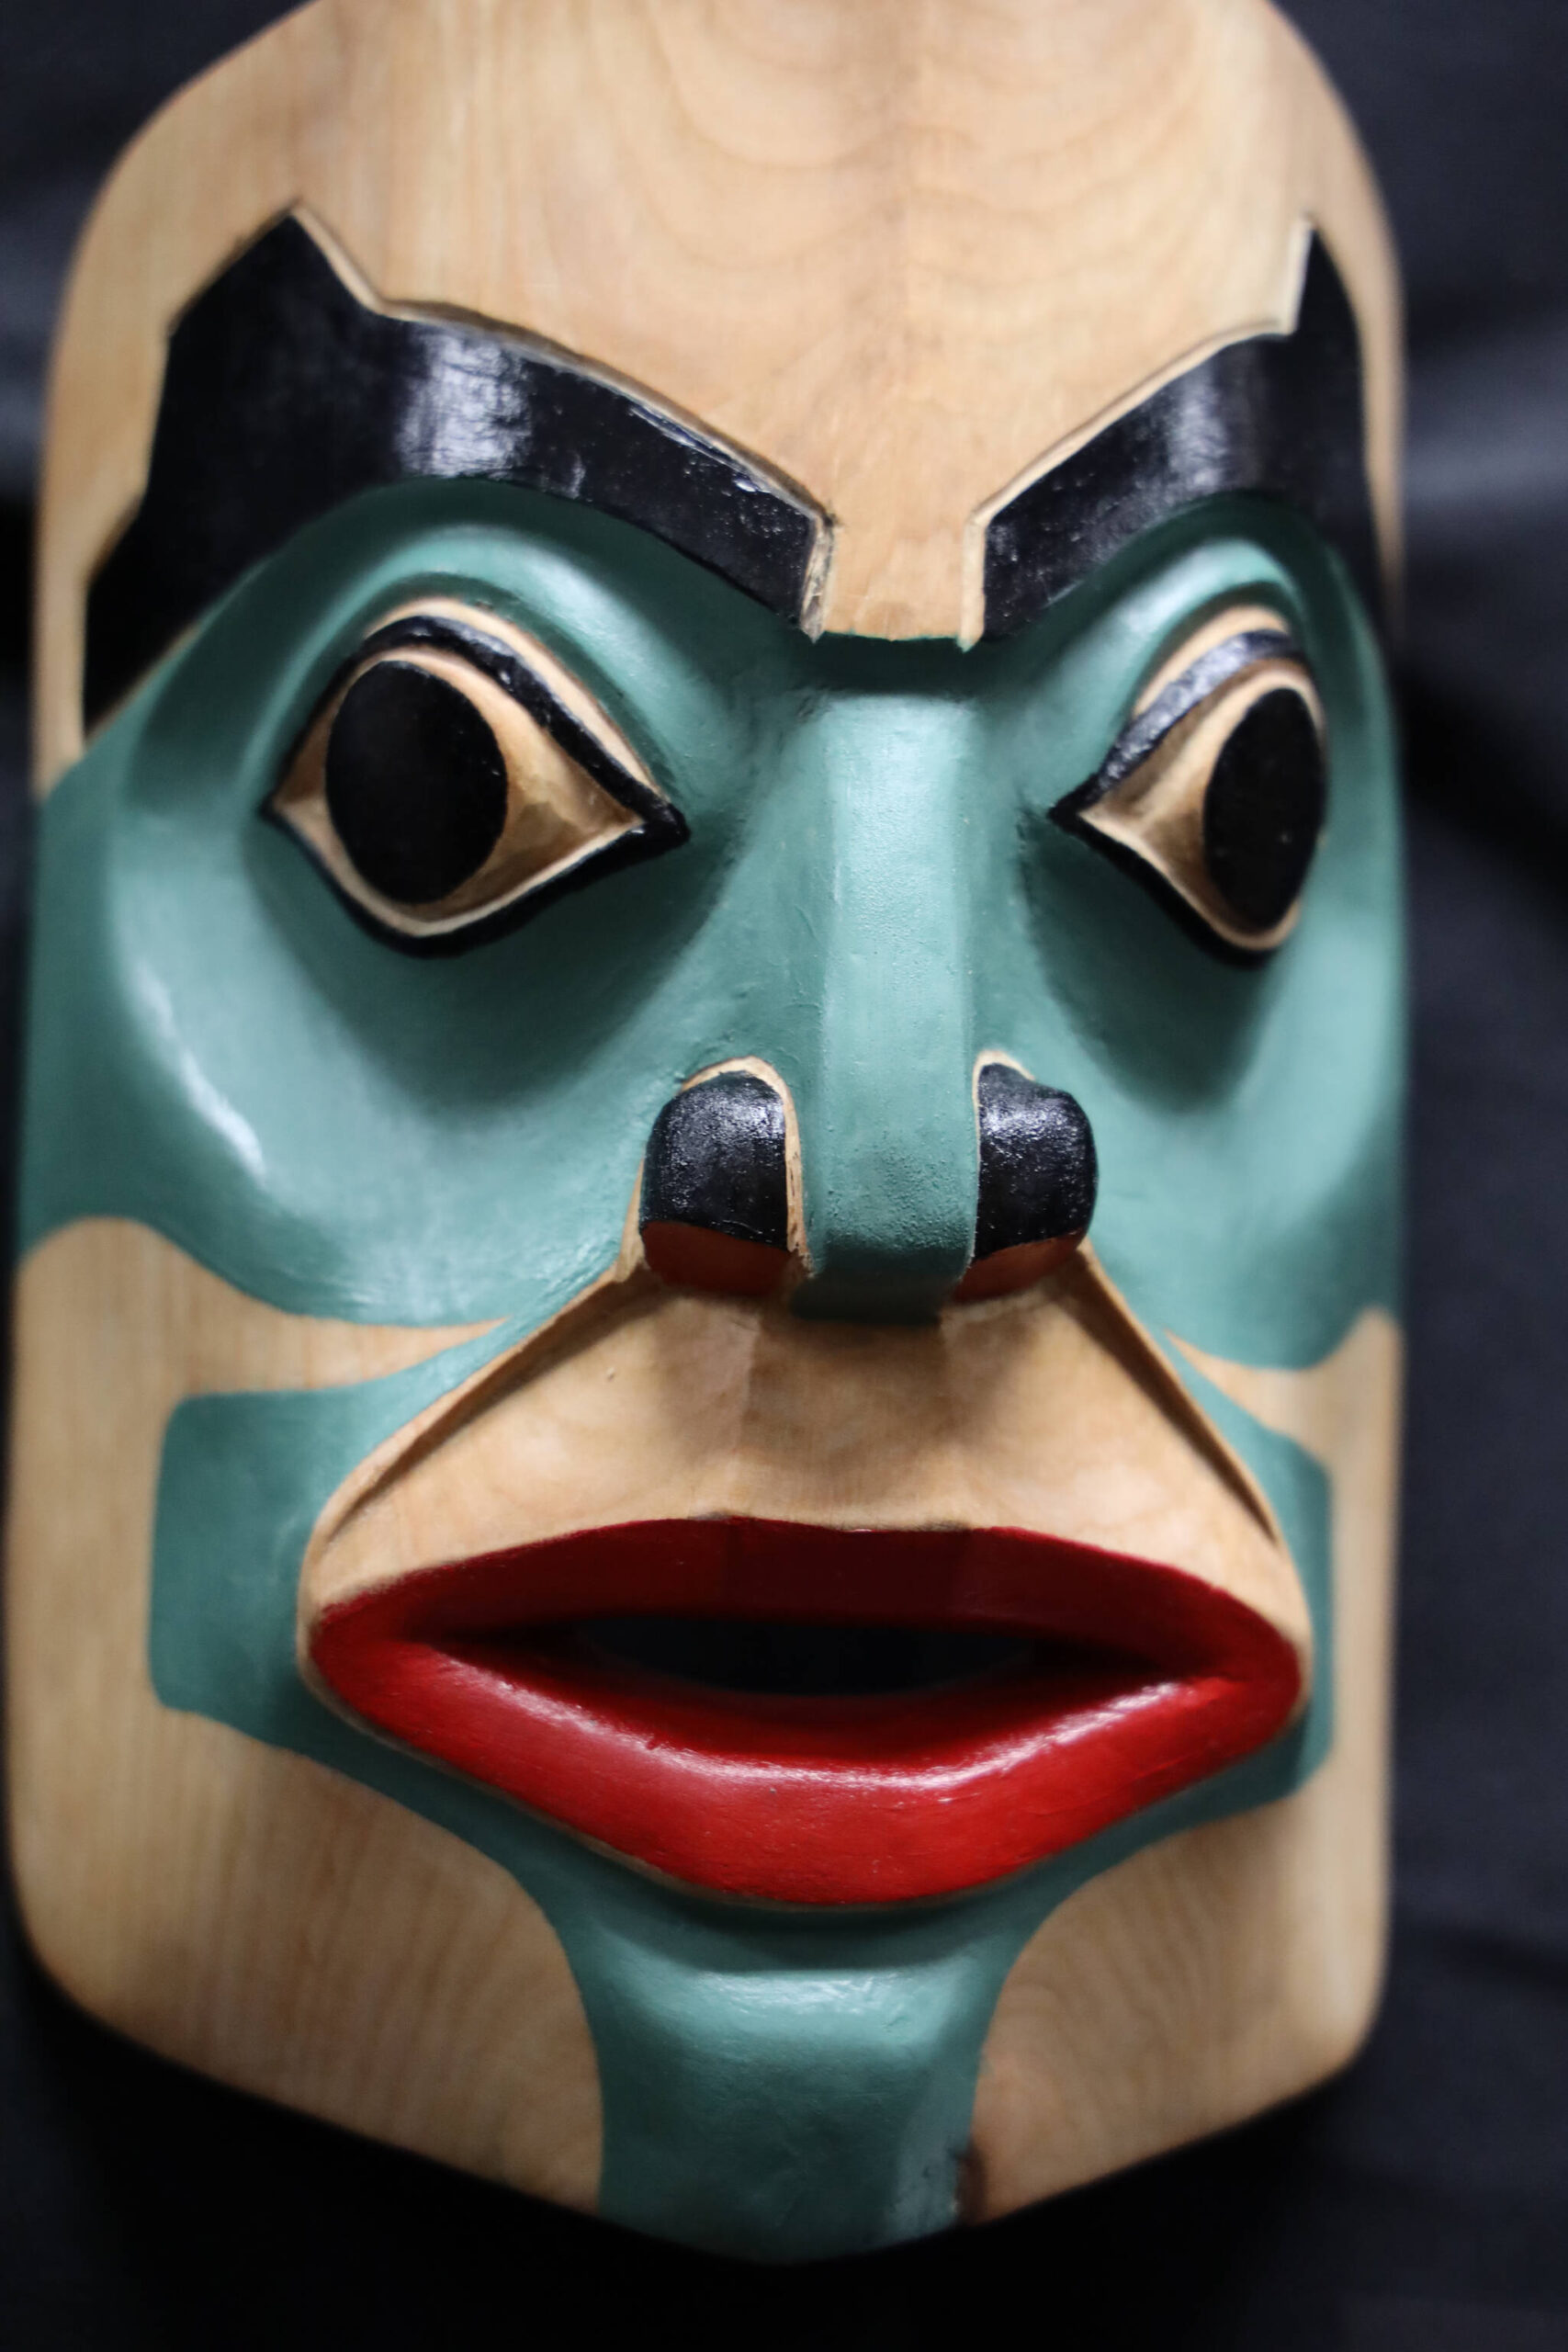 This mask titled “Hla dm baanu di baal’ack” was carved, without a planned sketch, by Tsimshian artist Huk Yuunsk David Lang. The piece was one of the many featured in a recent art gallery hosted Friday evening at the University of Alaska Southeast that showcased students’ work from the UAS Northwest Coast Art program. (Clarise Larson / Juneau Empire)